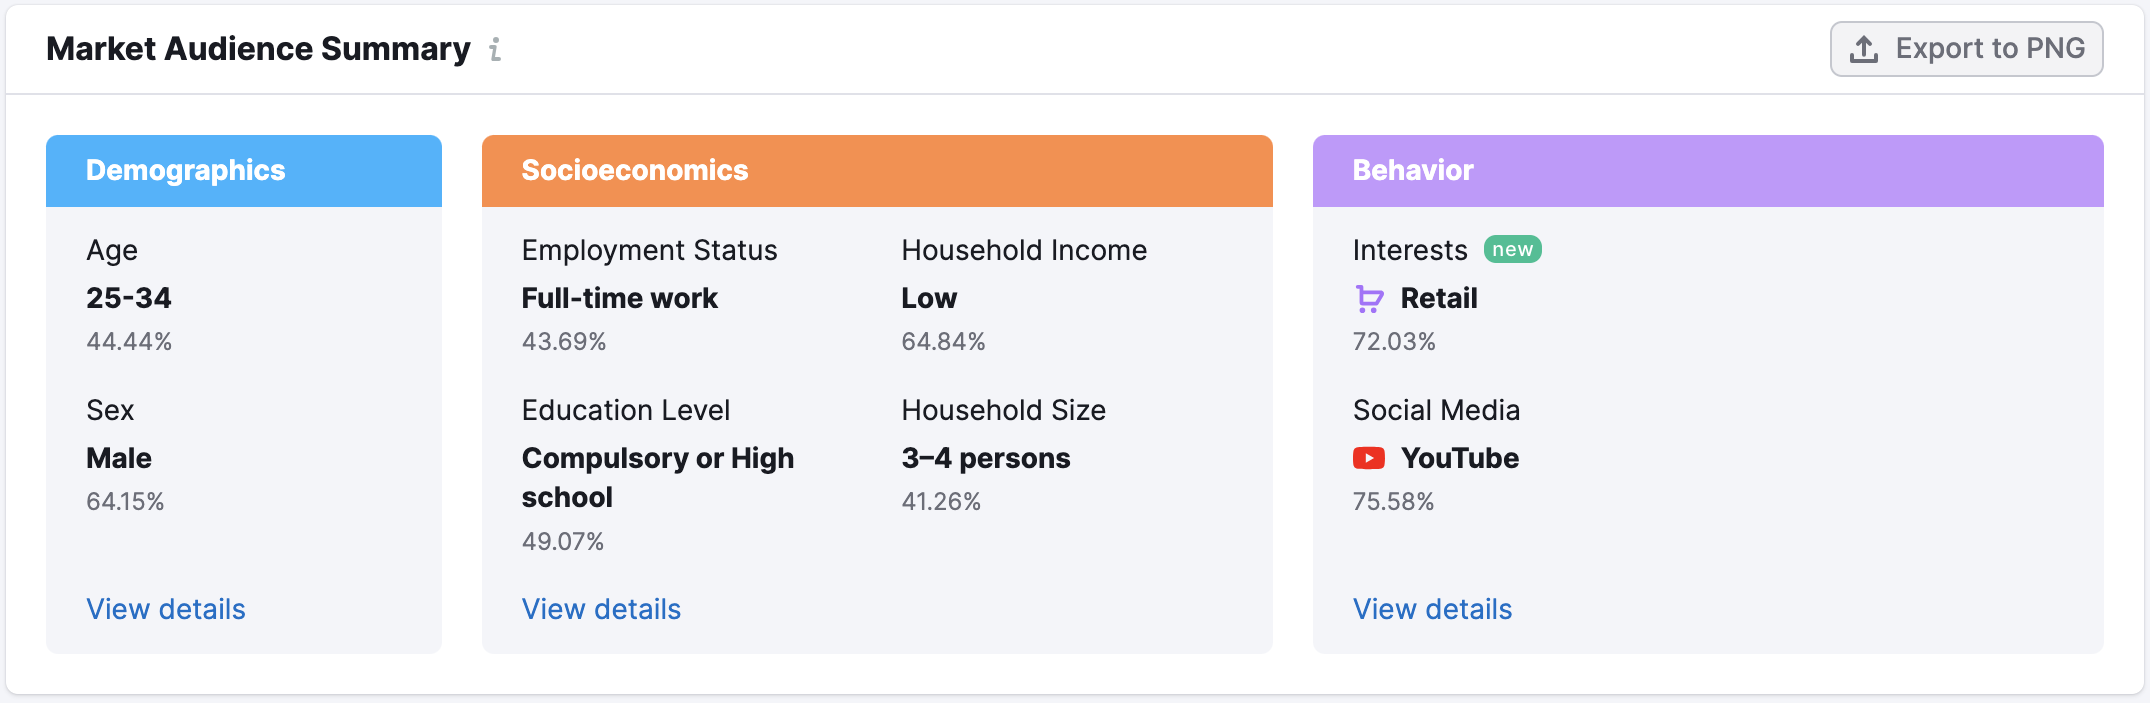 An example of what the Market Audience Summary looks like. There are three widgets, containing the information about demographics, economical and social status, main interests and most preferred social media platform.